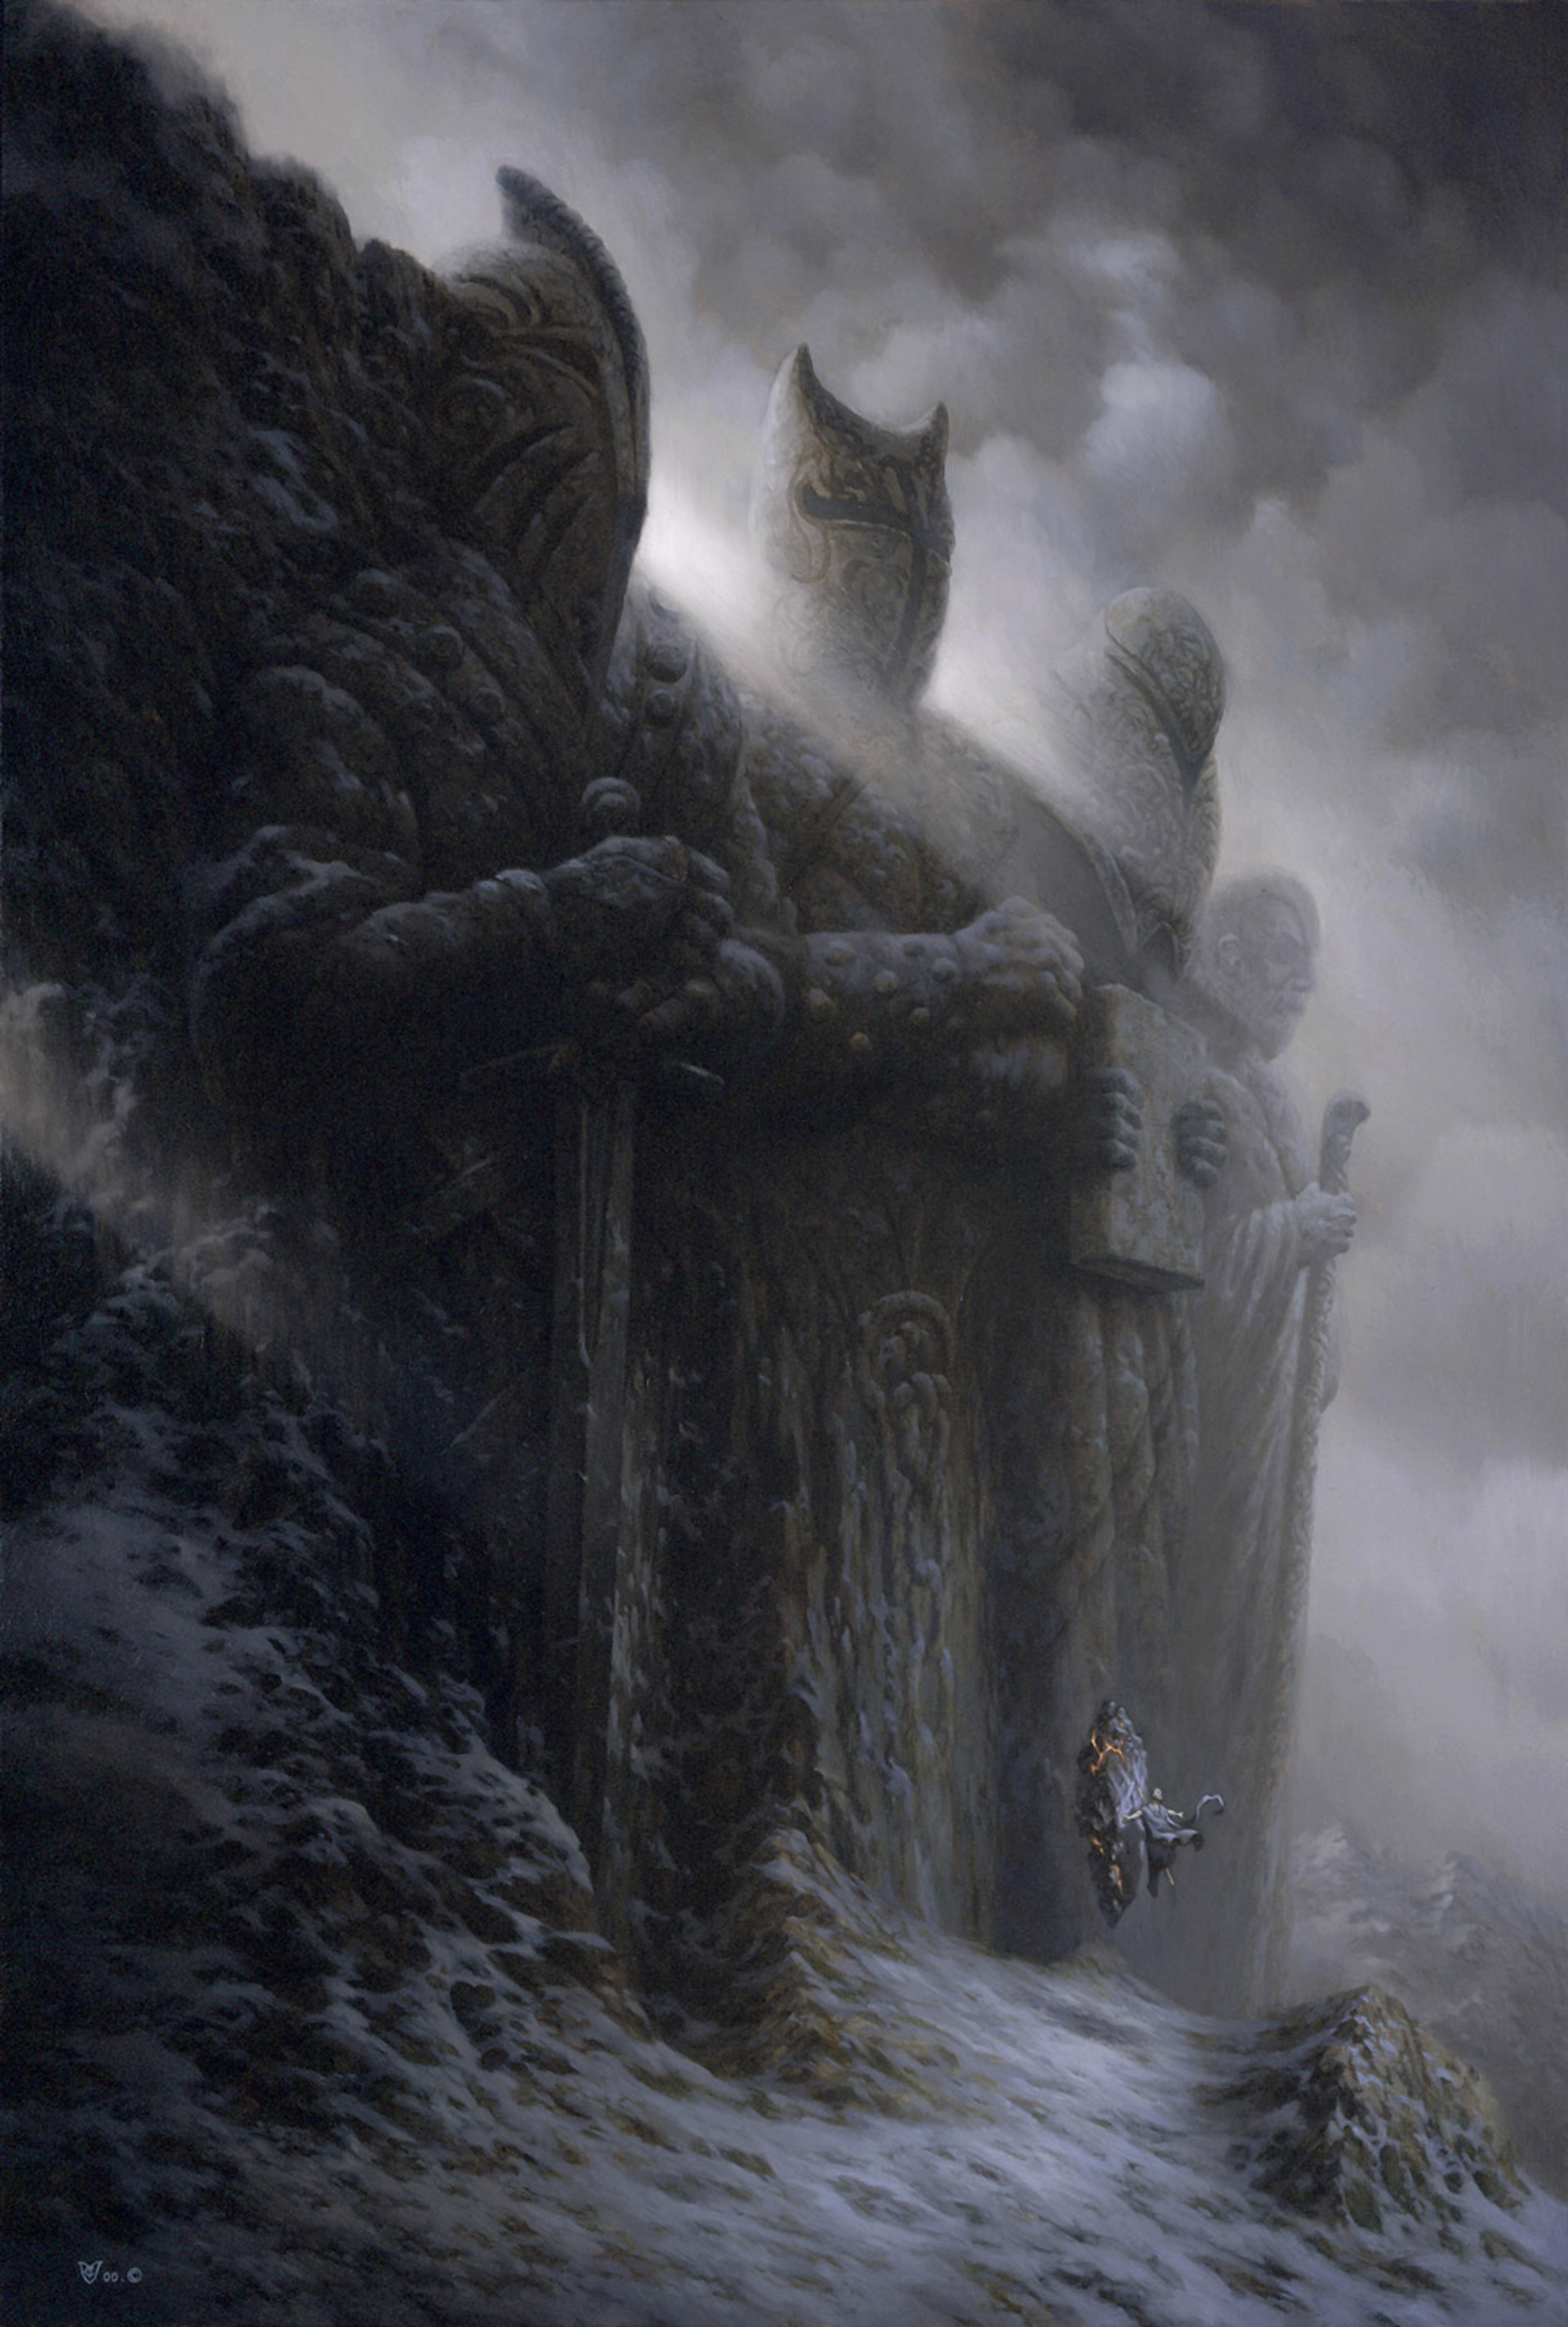 The Giants by Christophe Vacher